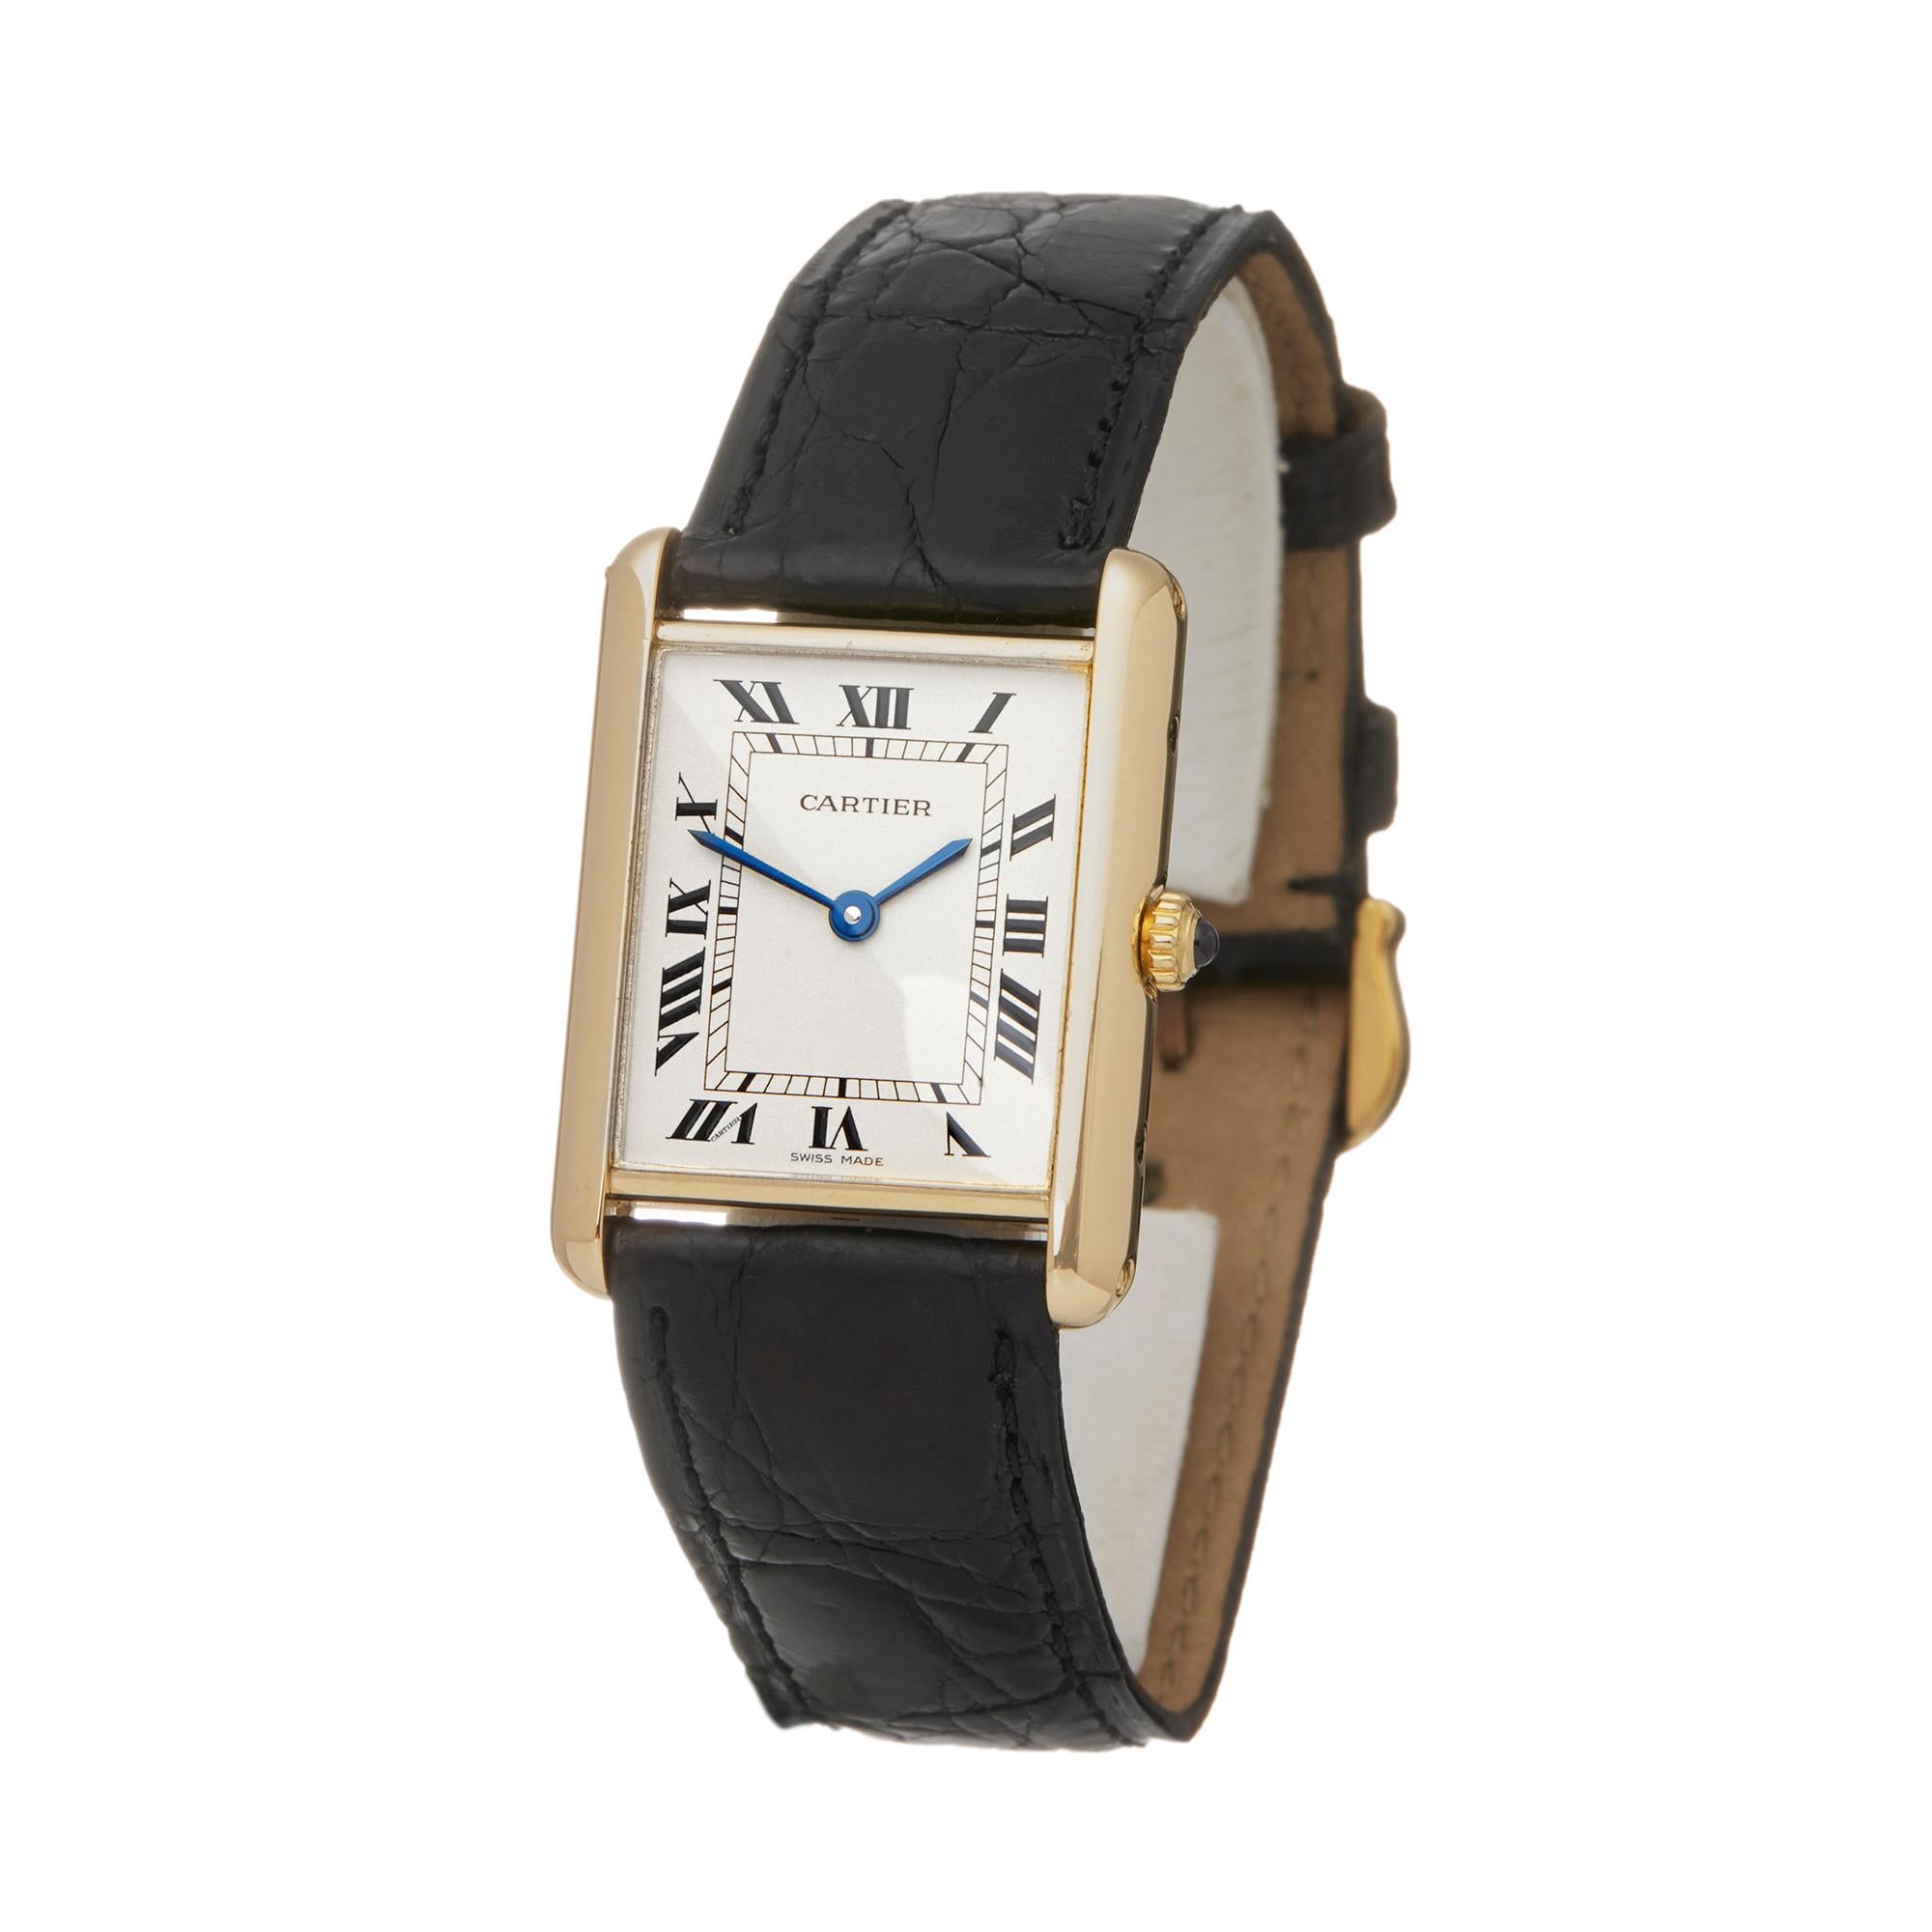 Ref: W5874
Manufacturer: Cartier
Model: Tank
Model Ref: 8810
Age: W5874
Gender: Ladies
Complete With: Presentation Box
Dial: White Roman 
Glass: Sapphire Crystal
Movement: Quartz
Water Resistance: To Manufacturers Specifications
Case: Yellow